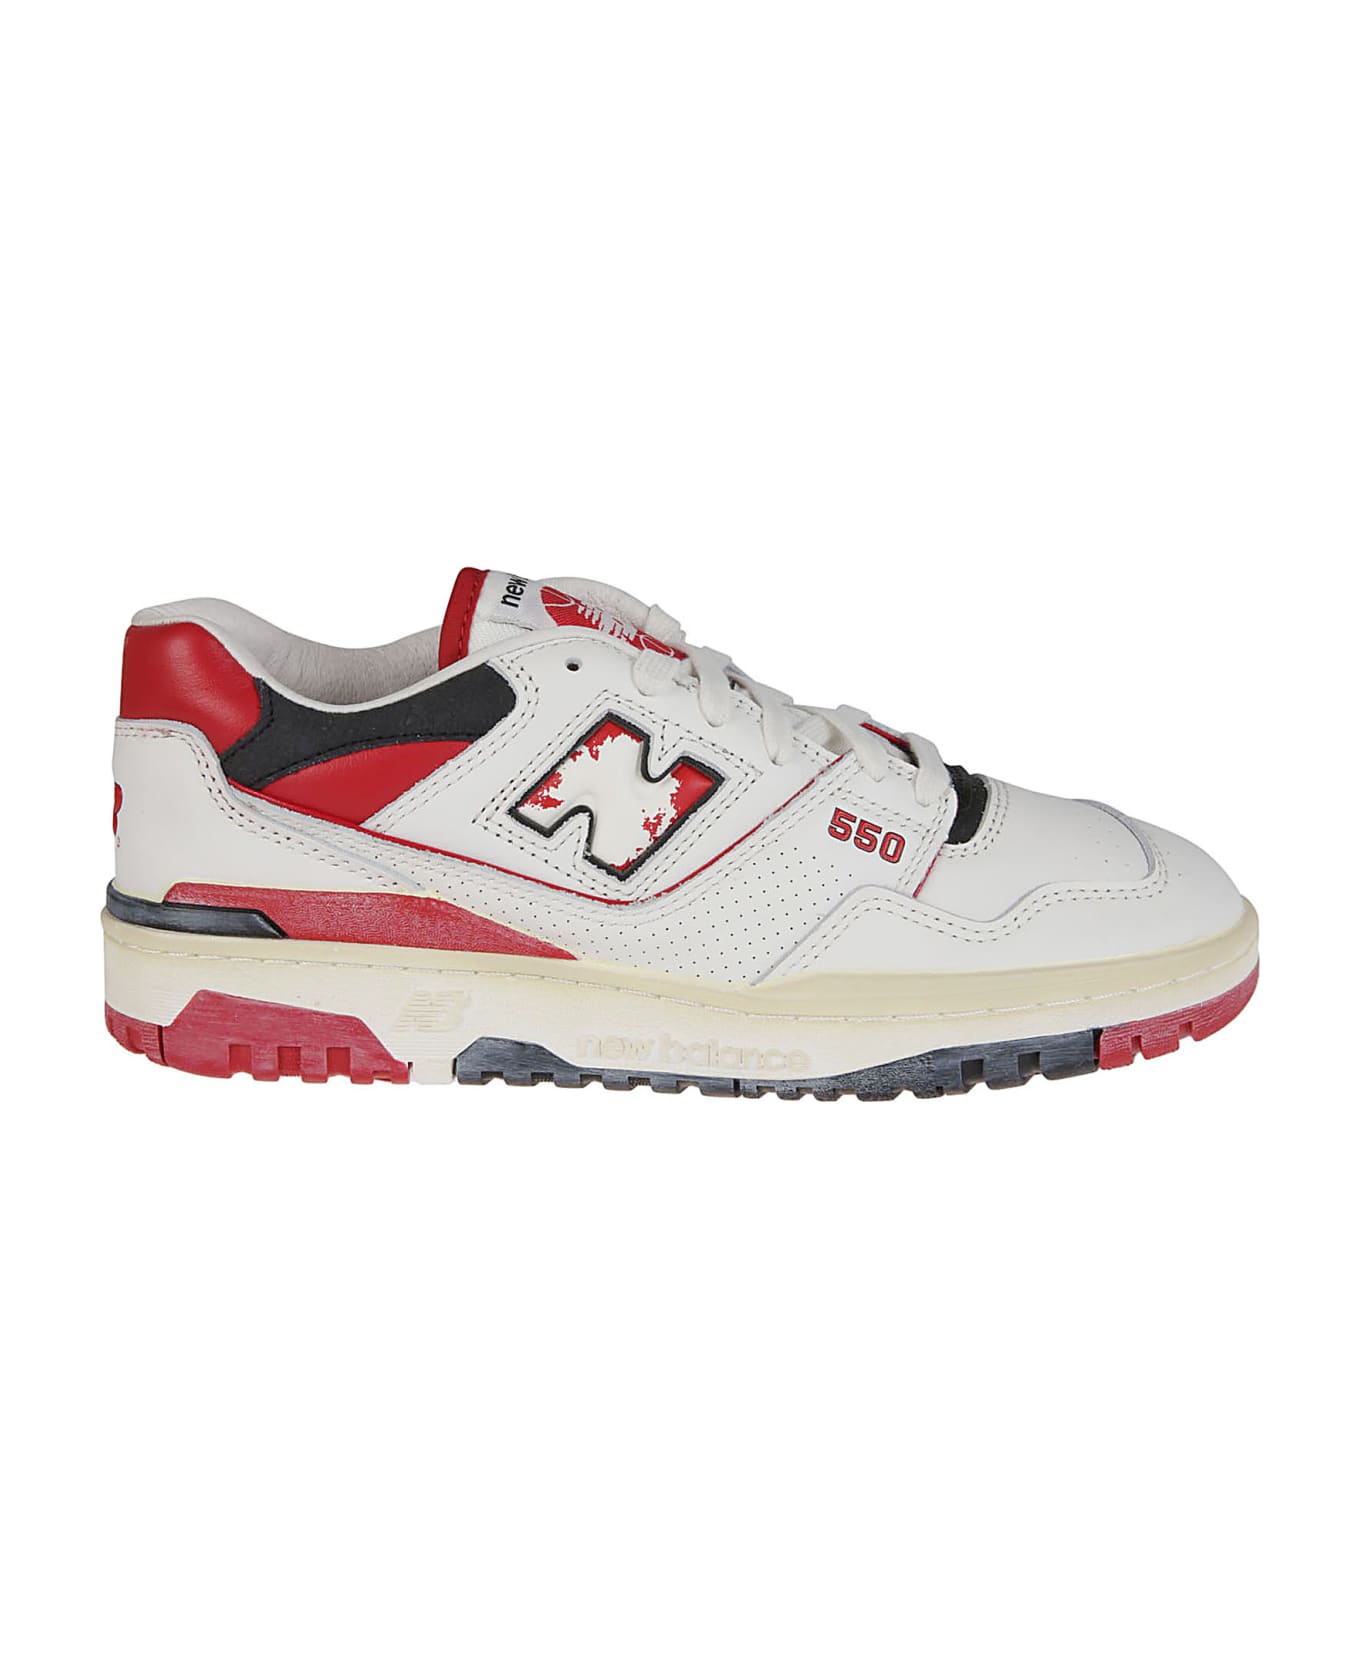 New Balance 550 Sneakers - Off White/red スニーカー